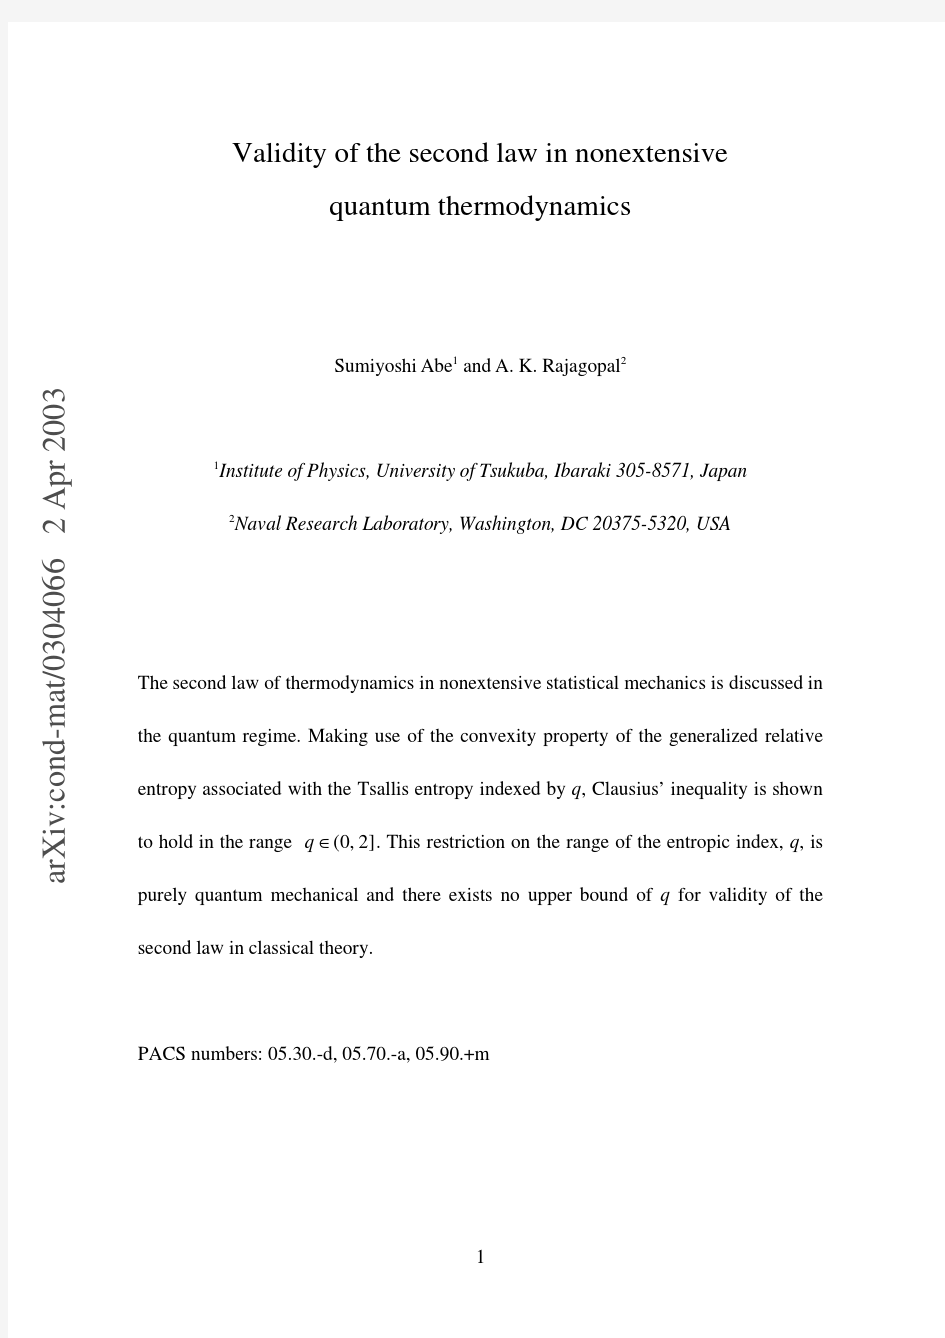 Validity of the second law in nonextensive quantum thermodynamics